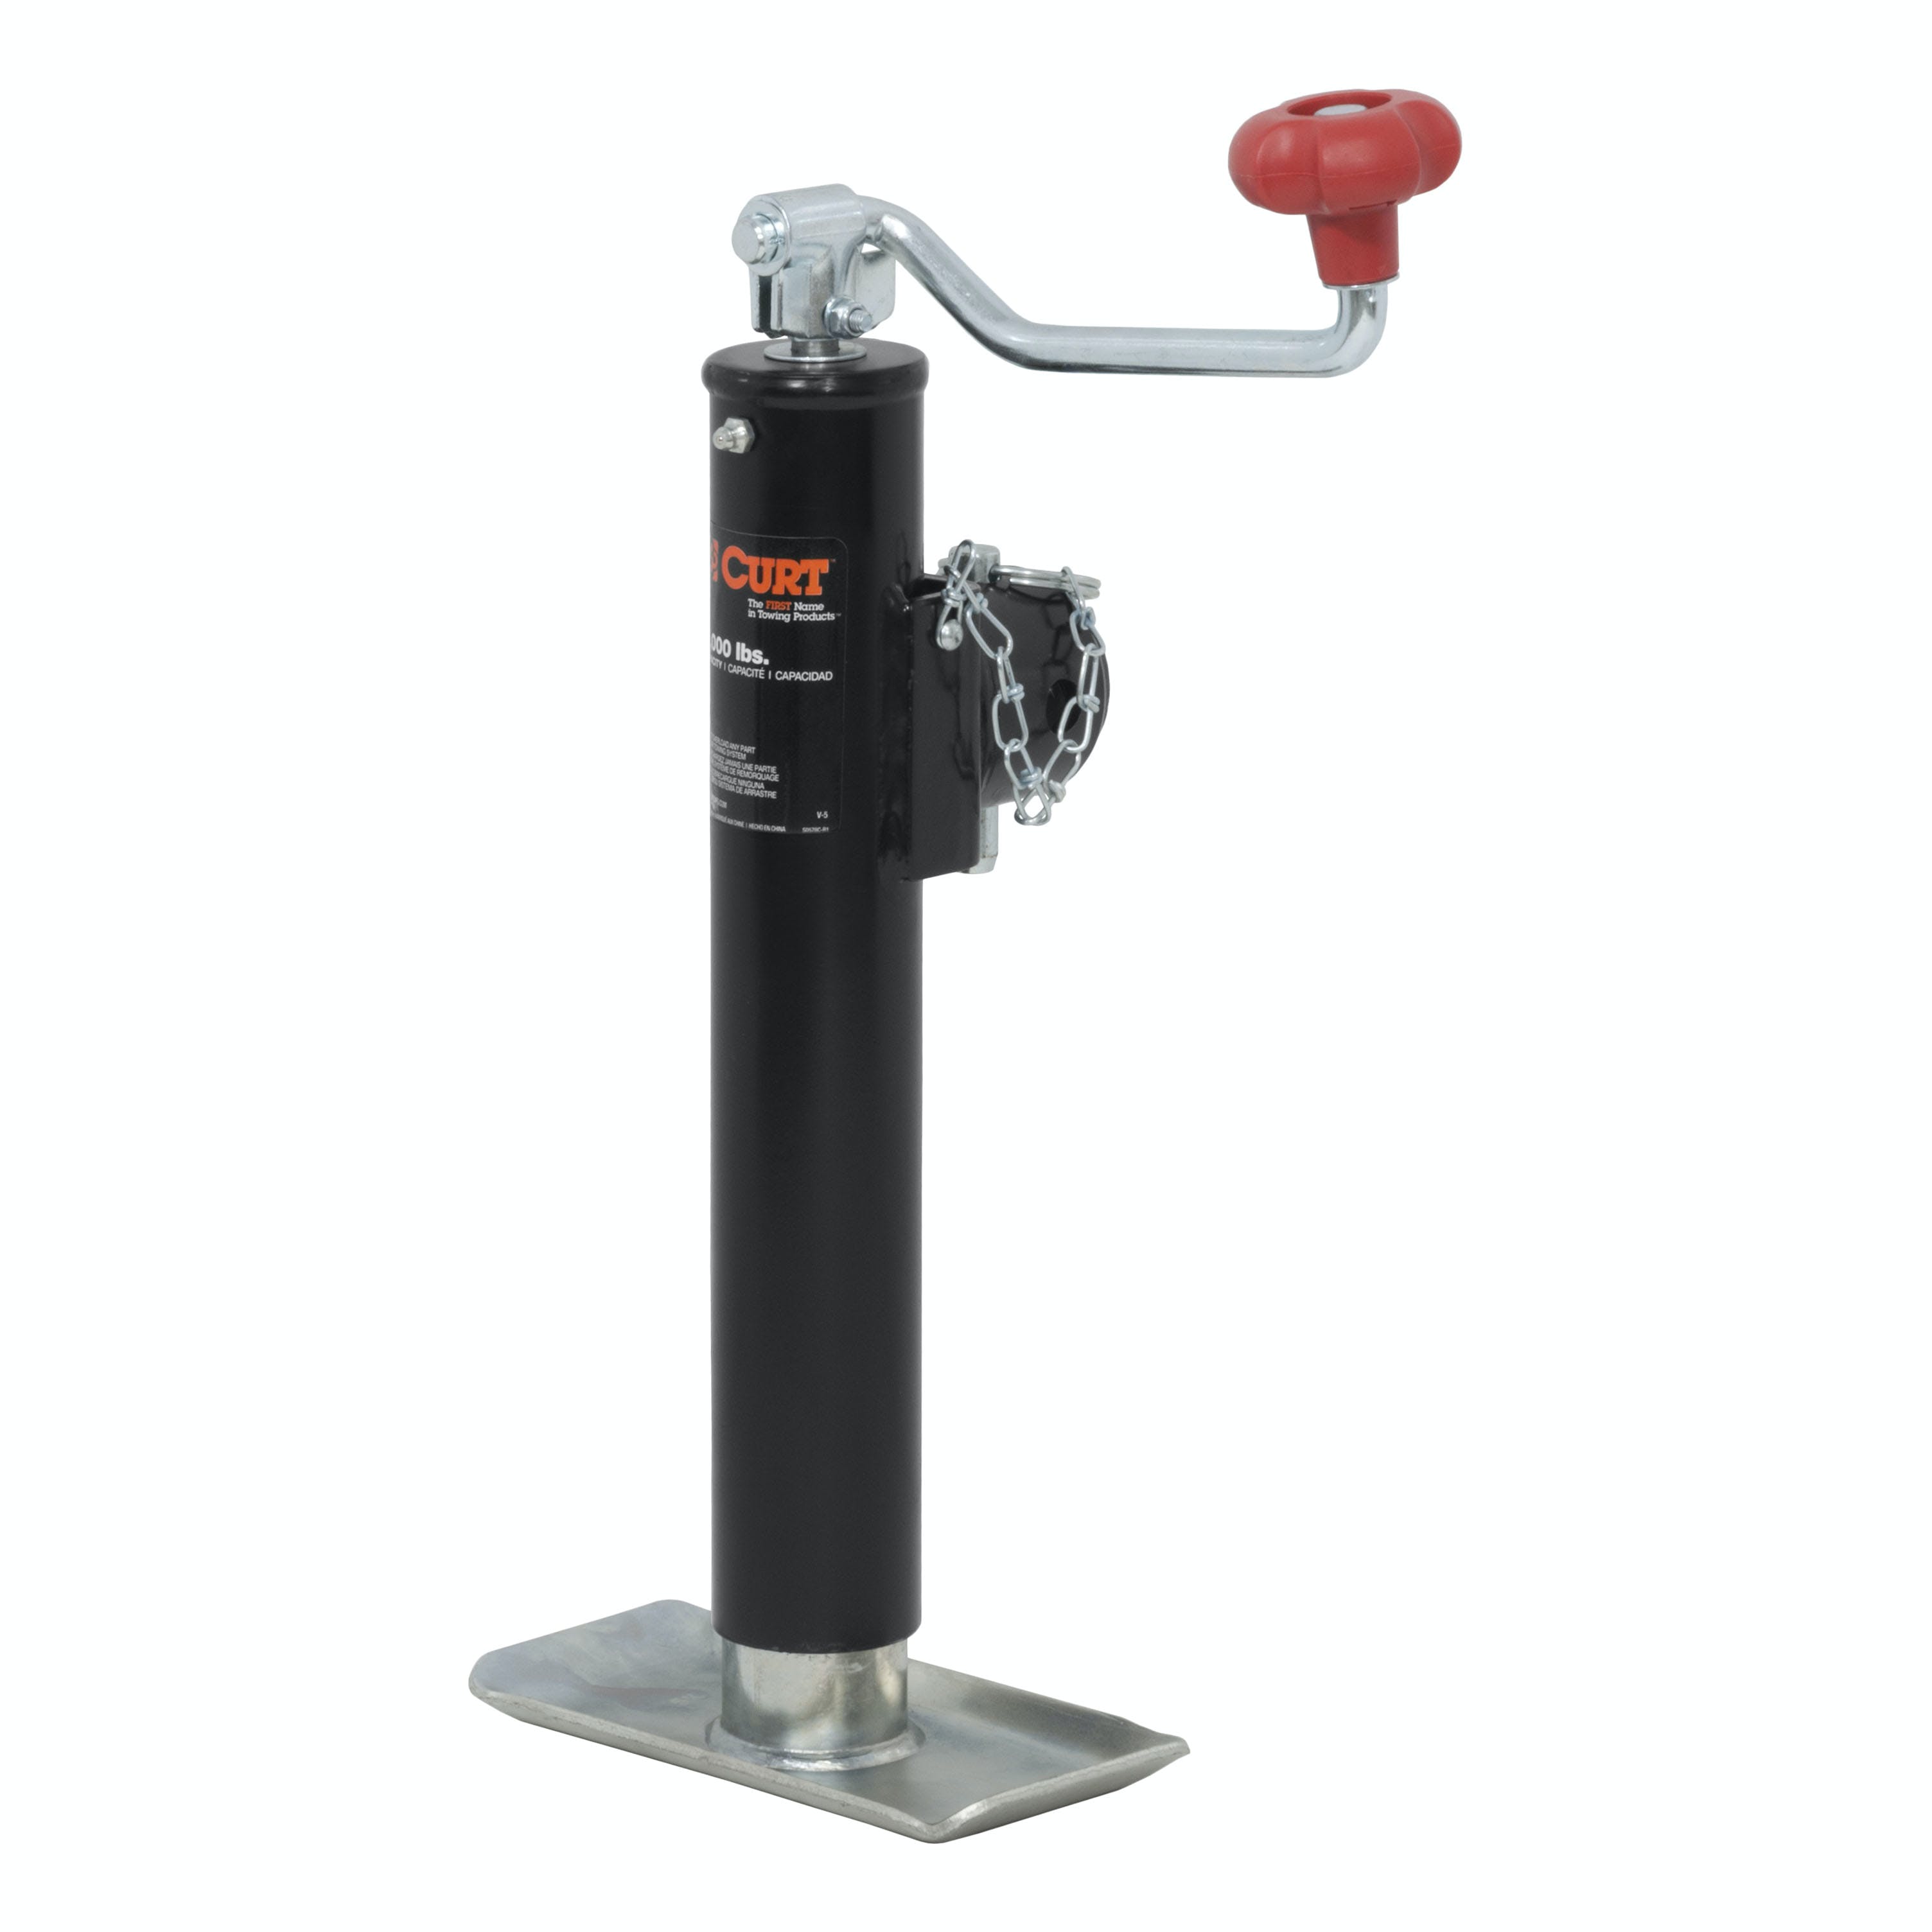 CURT 28350 Pipe-Mount Swivel Jack with Top Handle (5,000 lbs, 10 Travel)